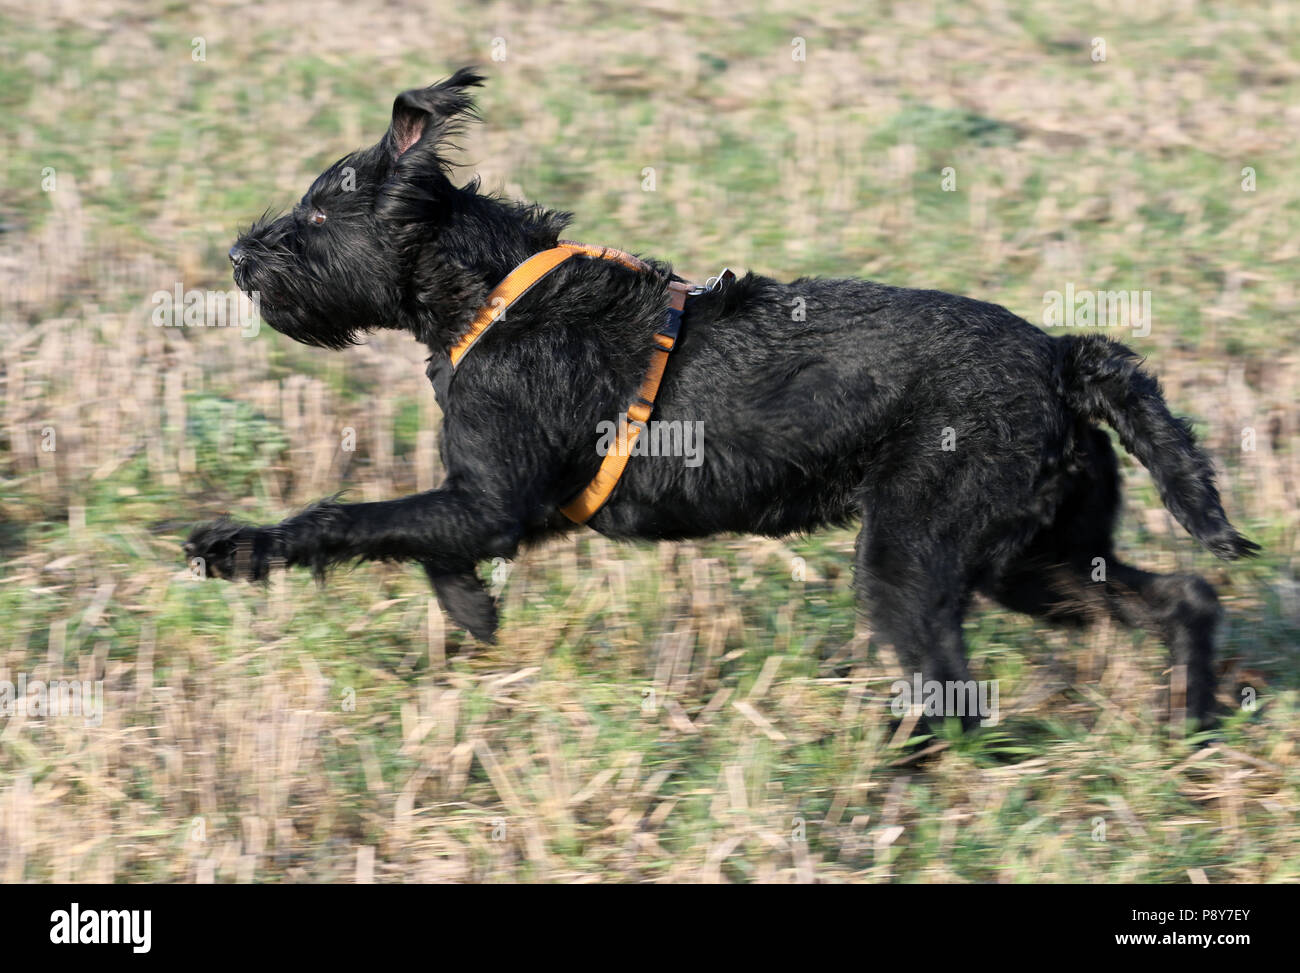 Neustadt (Dosse), Germany, Riesenschnauzer is running over a stubble field Stock Photo